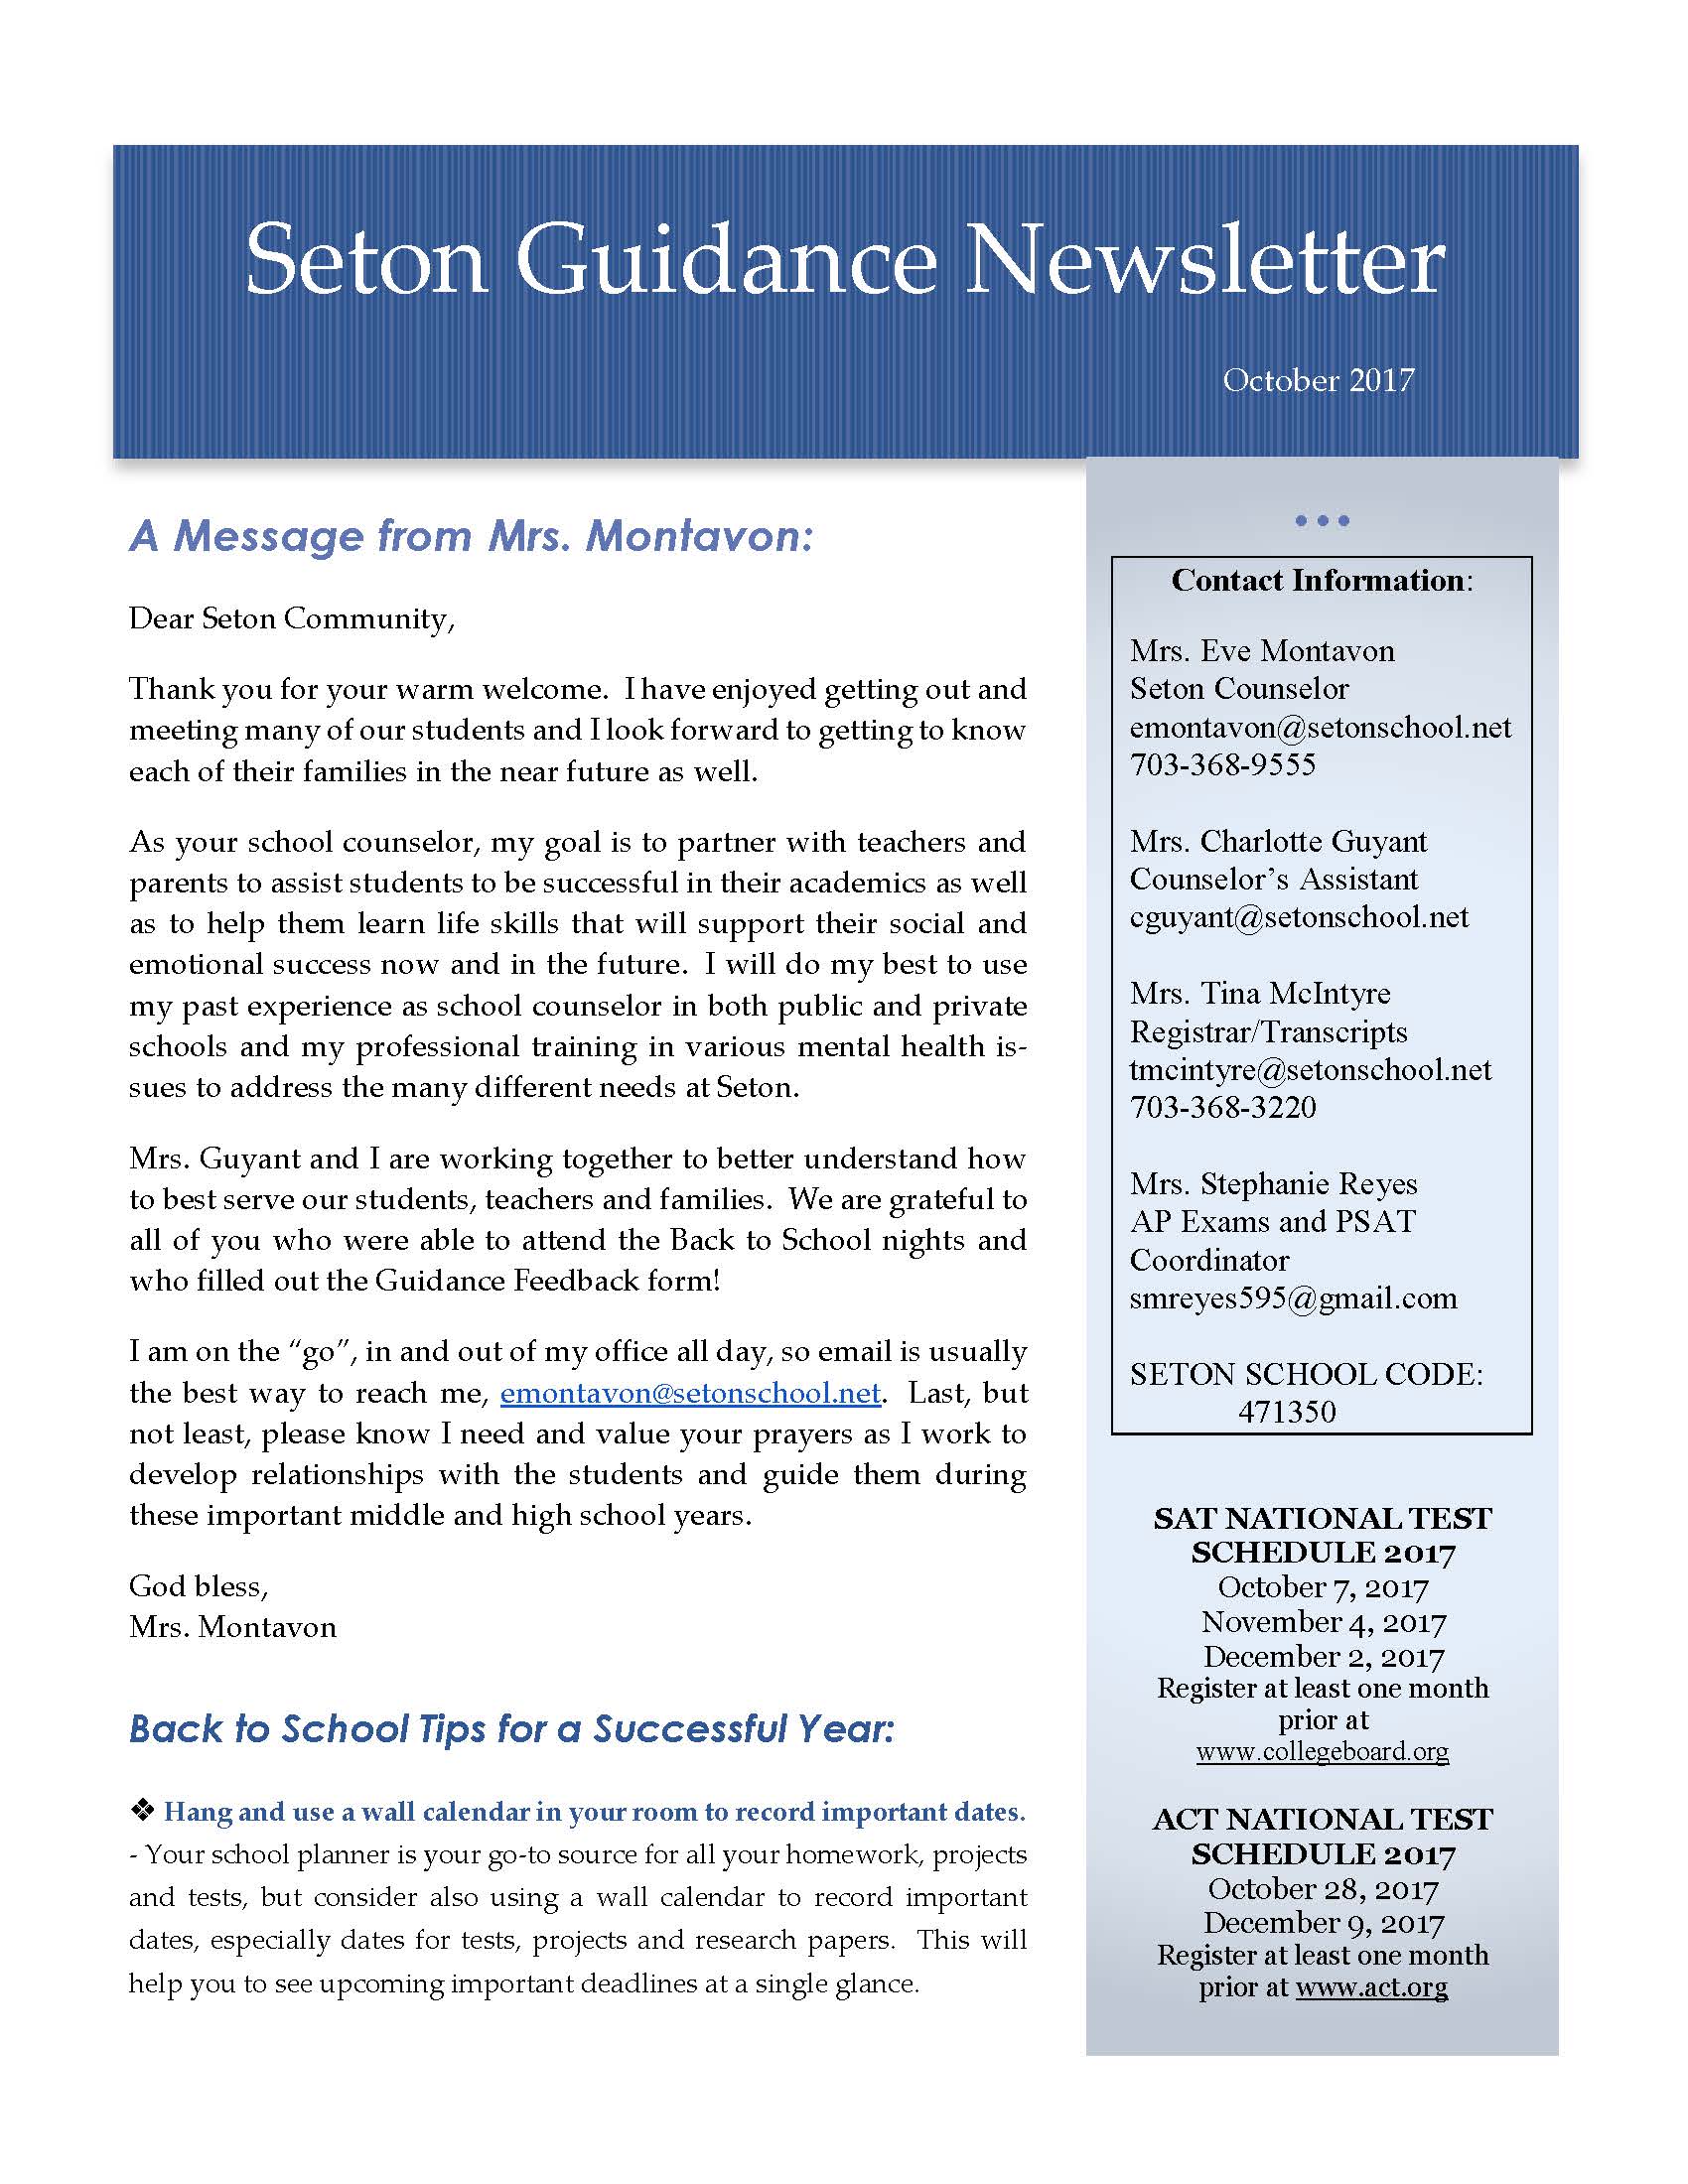 May 2017 Guidance Newsletter